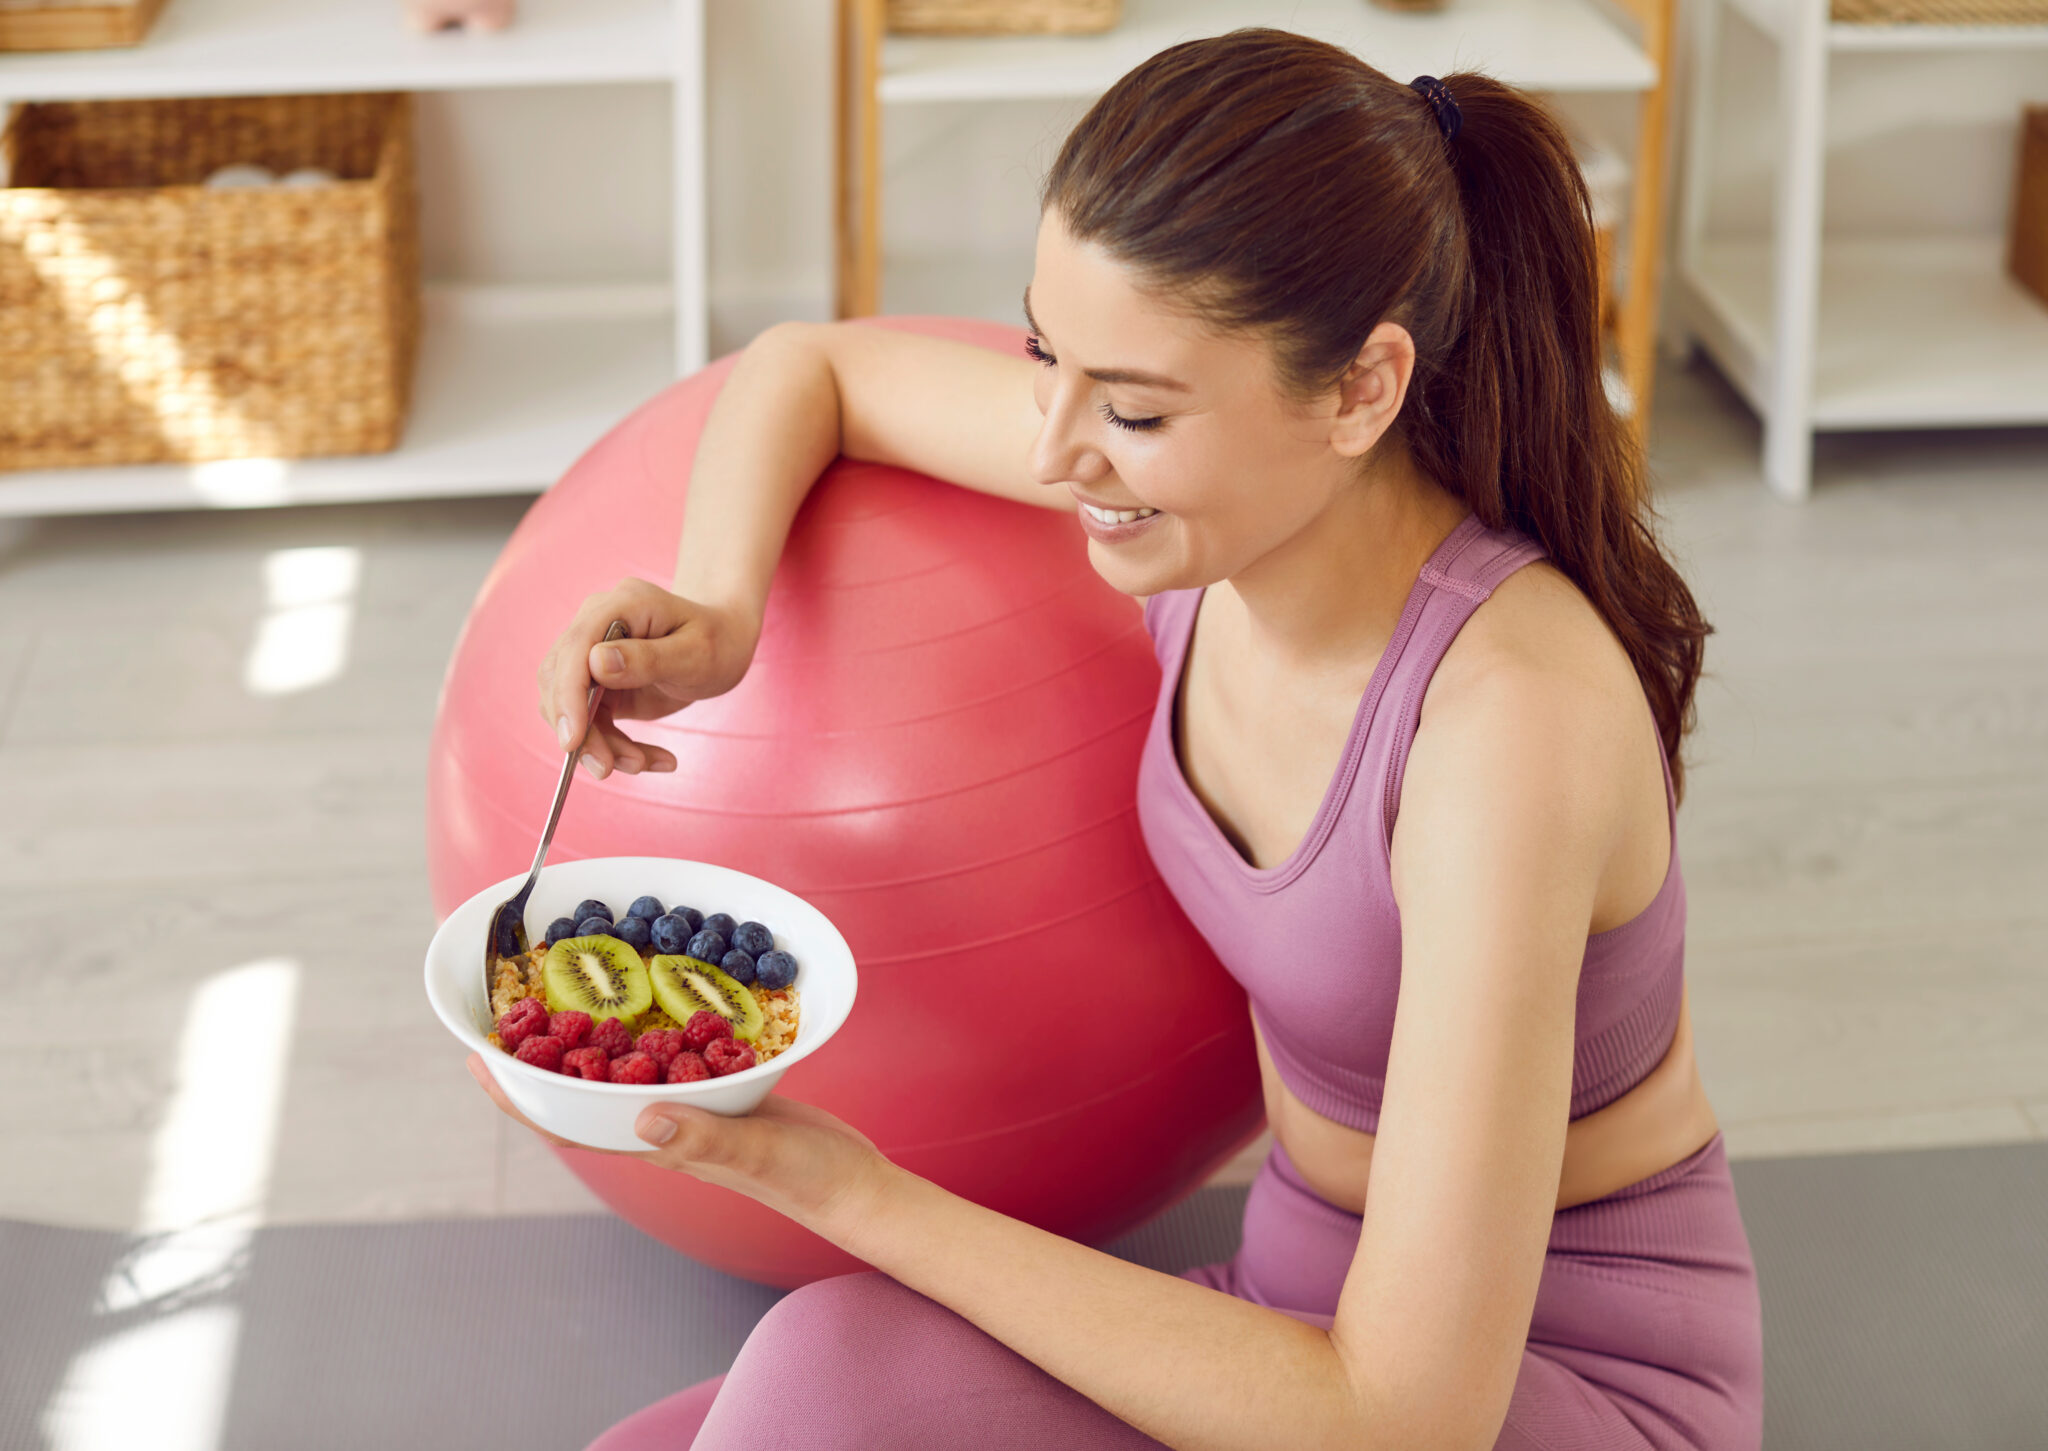 Fasted or Fed: What is the best for women trying to lose weight